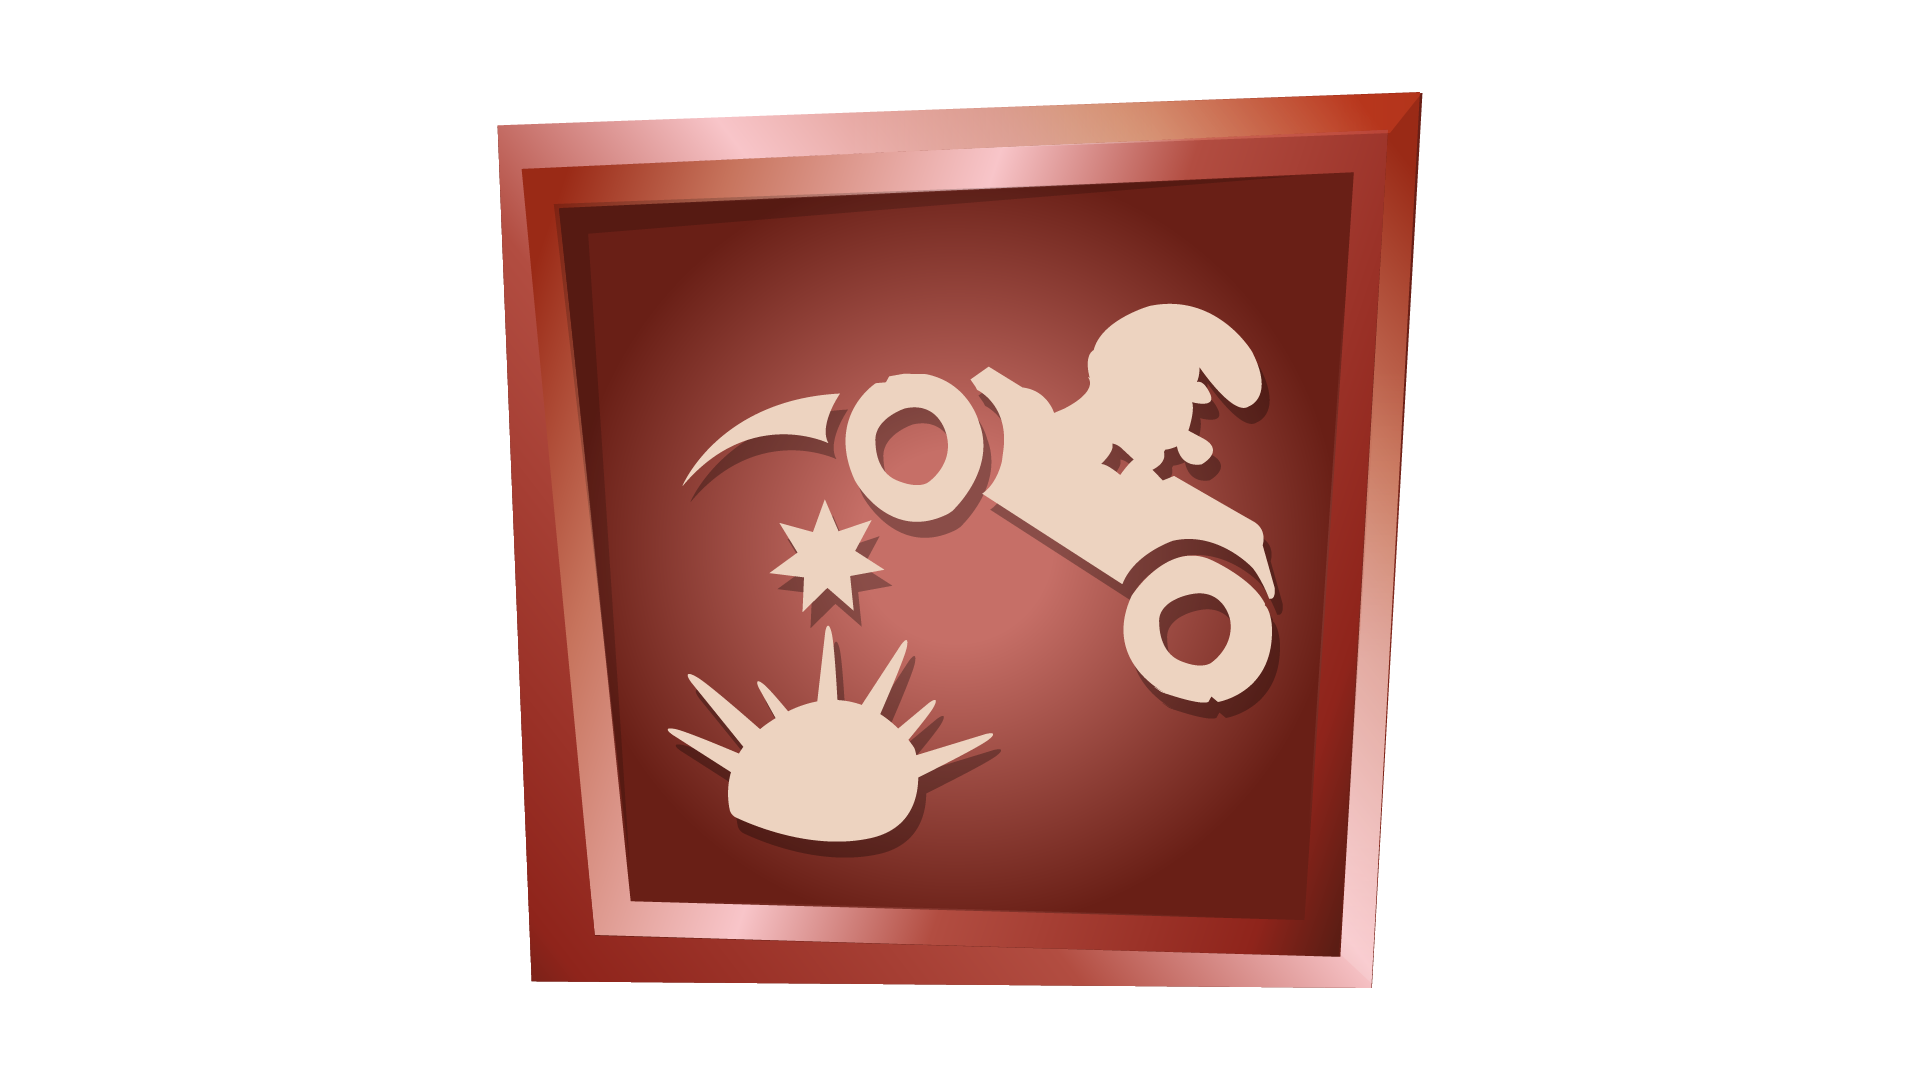 Icon for A Forgotten Bug